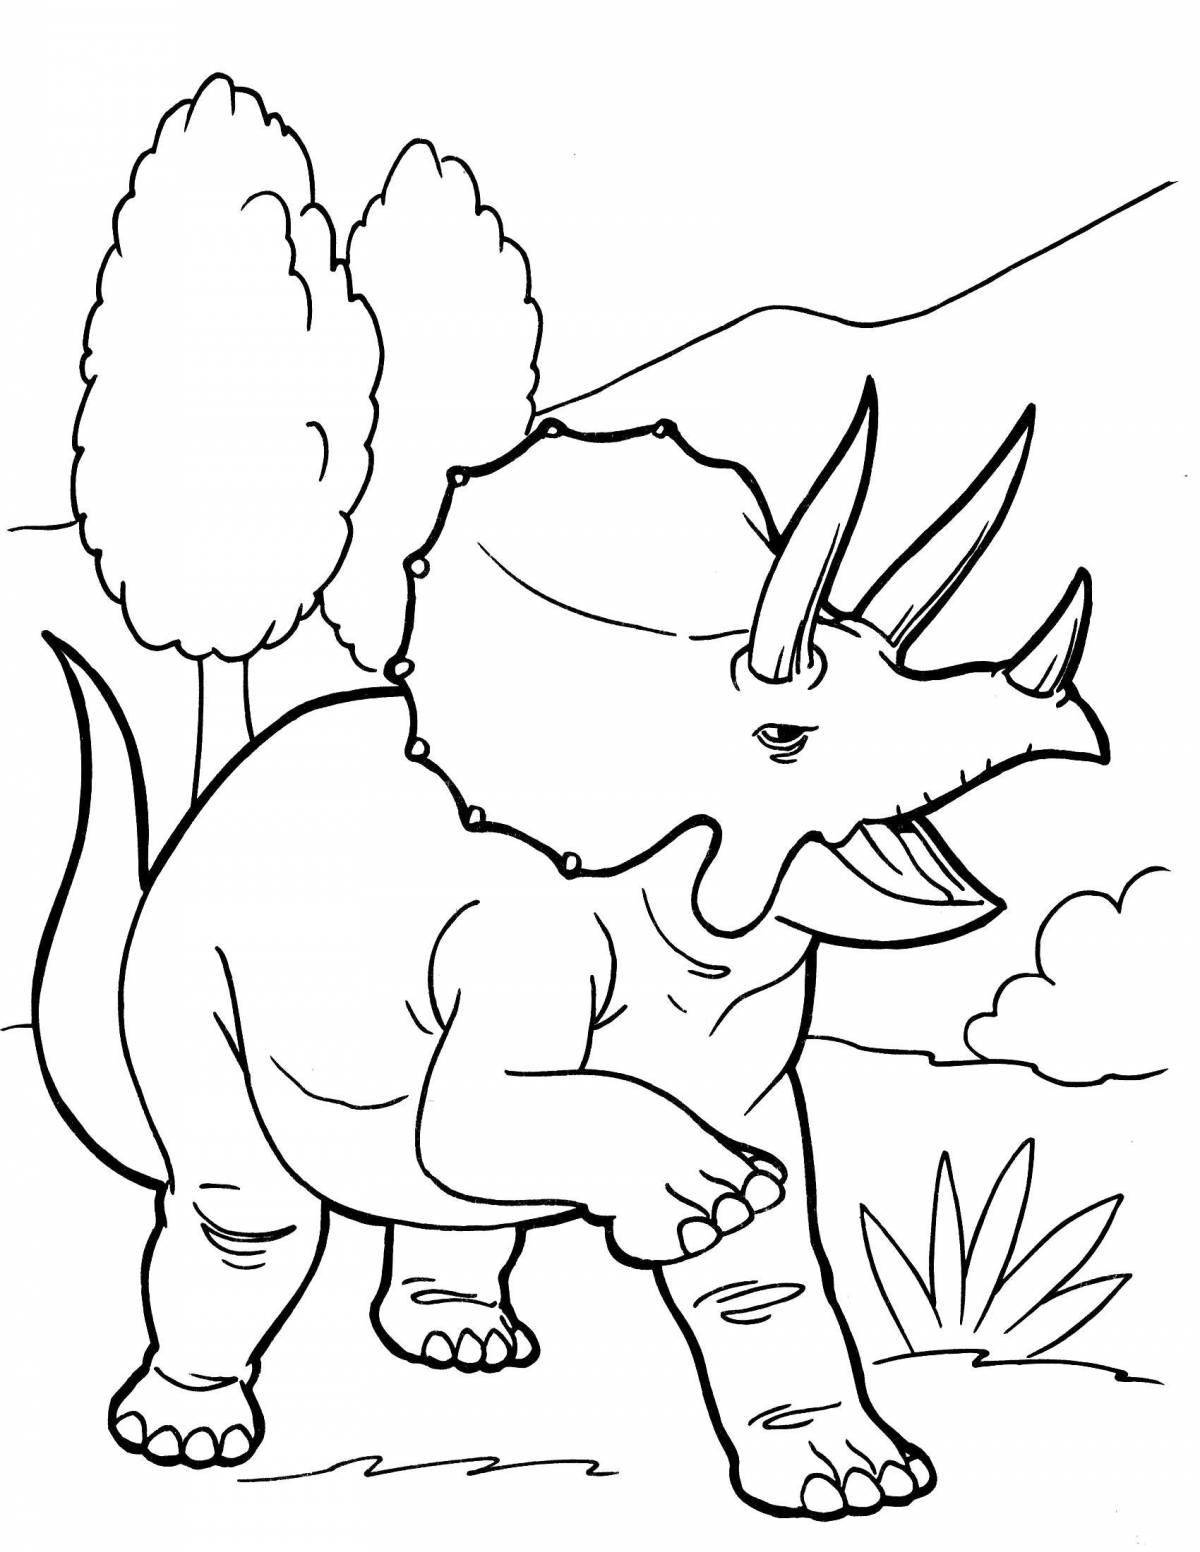 Funny dinosaur coloring pages for 5 year olds